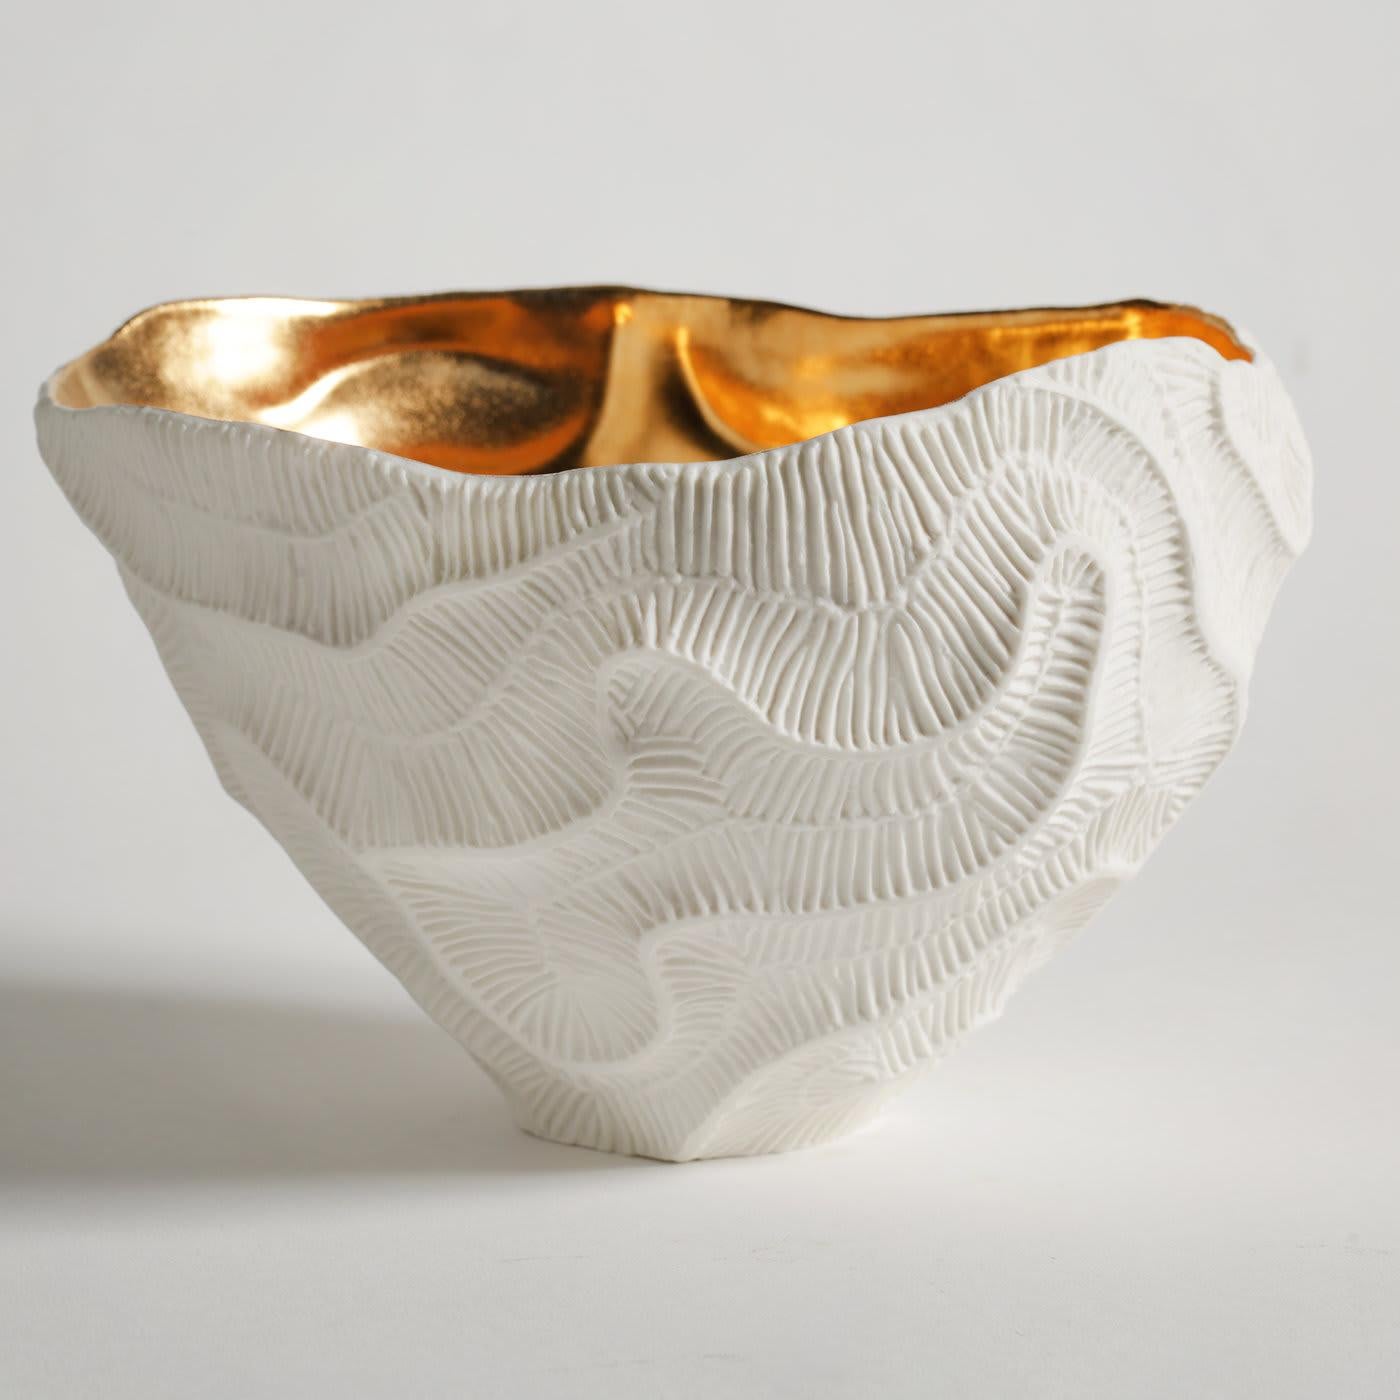 Fossils of madrepore inspire the minute texture decorating the exterior of this striking bowl of the Fossilia collection. A meticulously crafted mold and the use of unglazed porcelain, or 